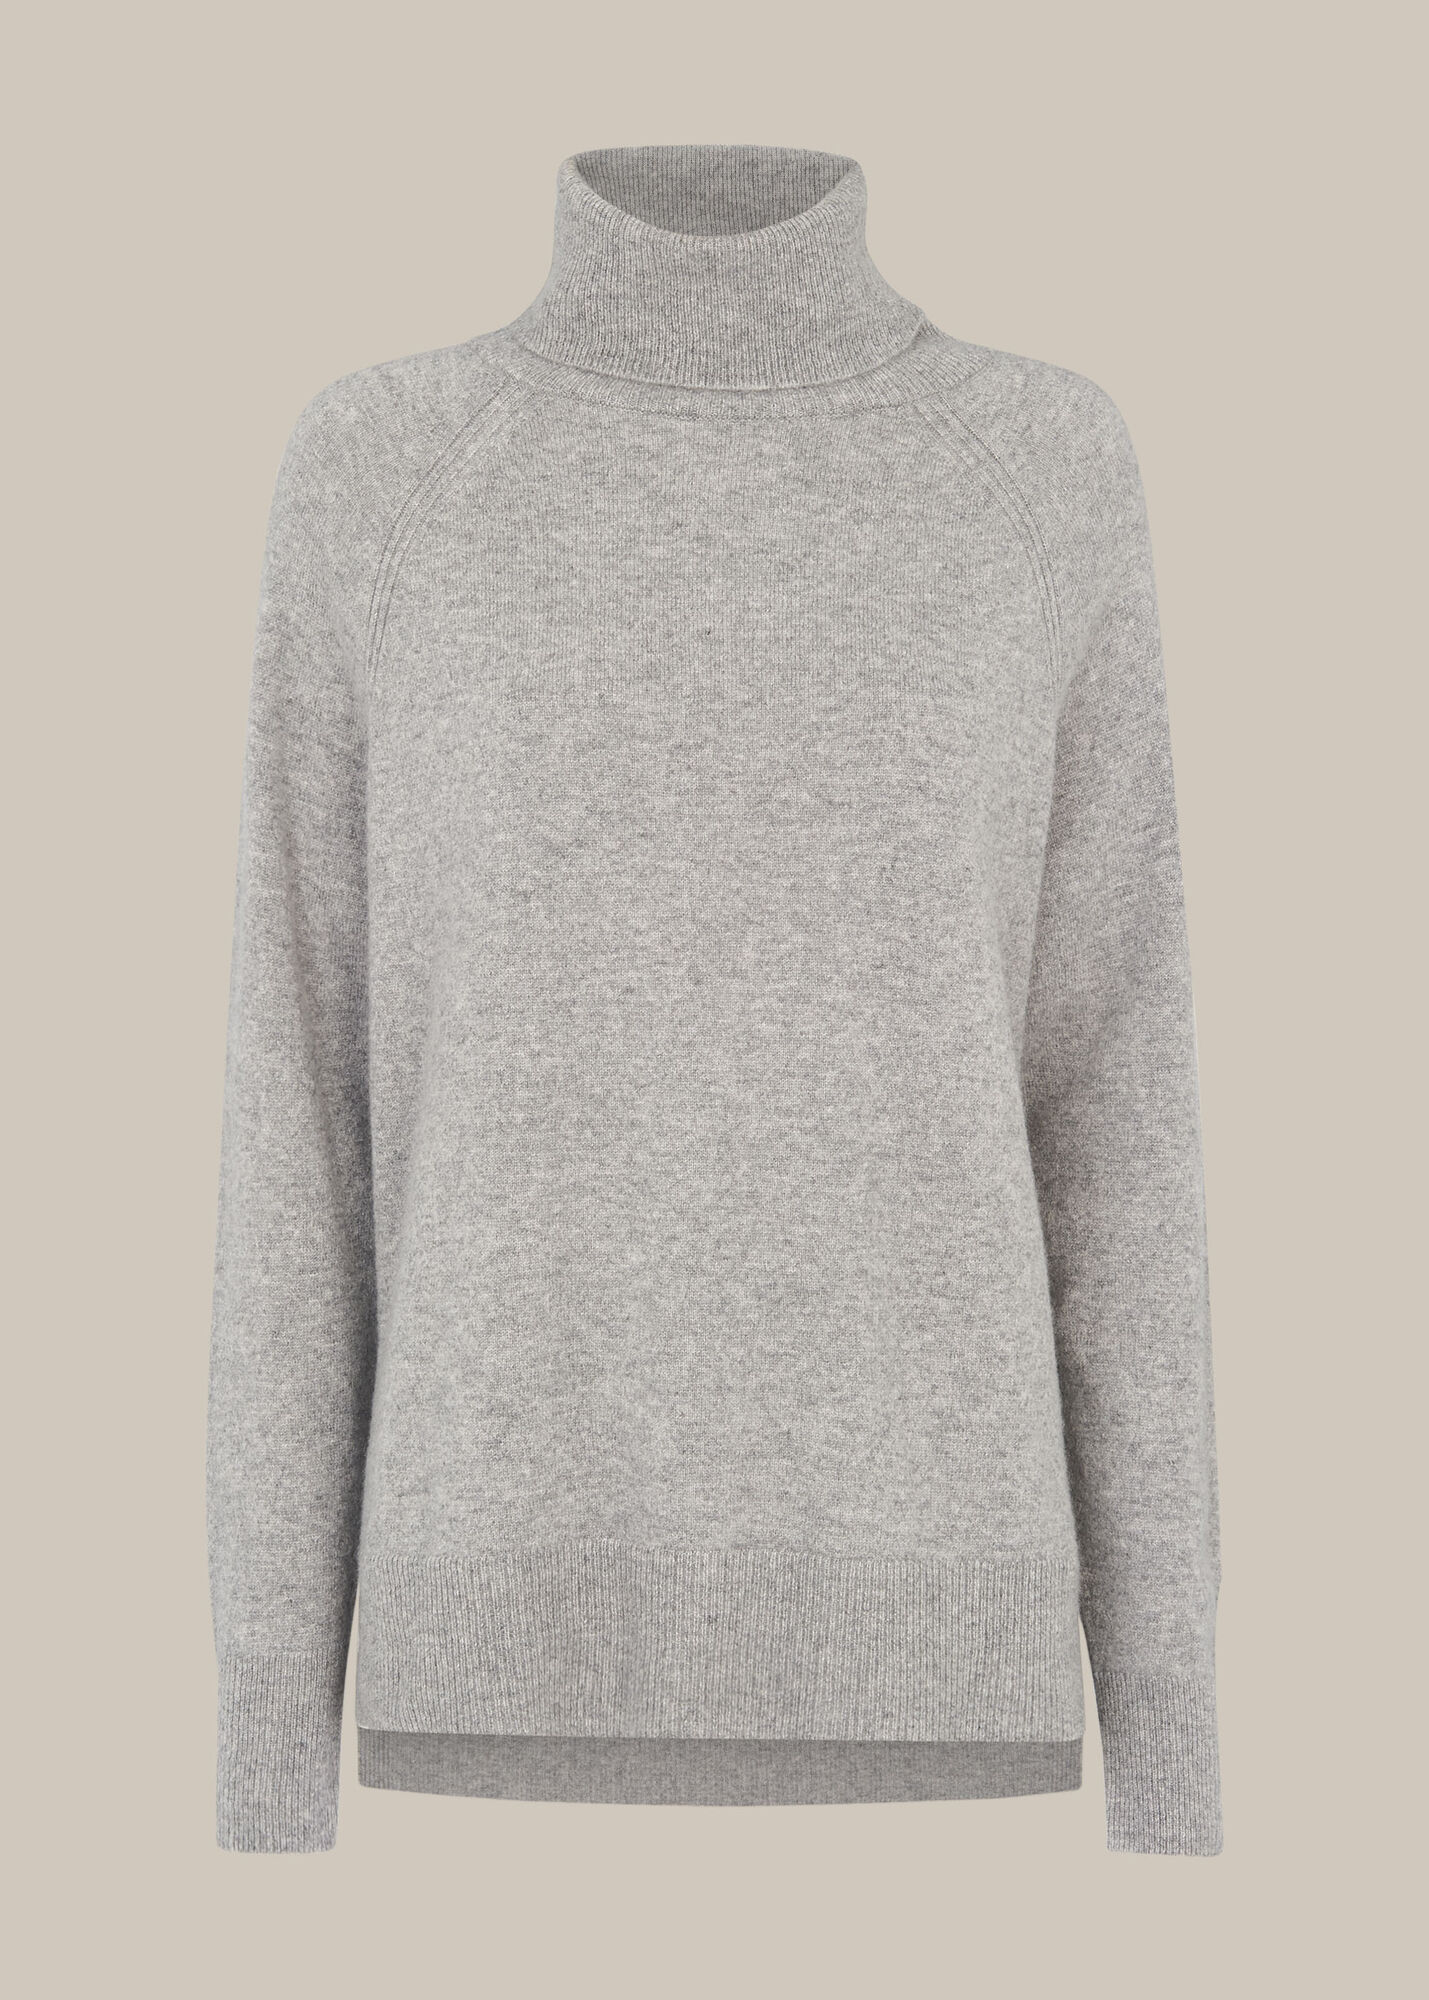 Grey Cashmere Roll Neck Knit | WHISTLES